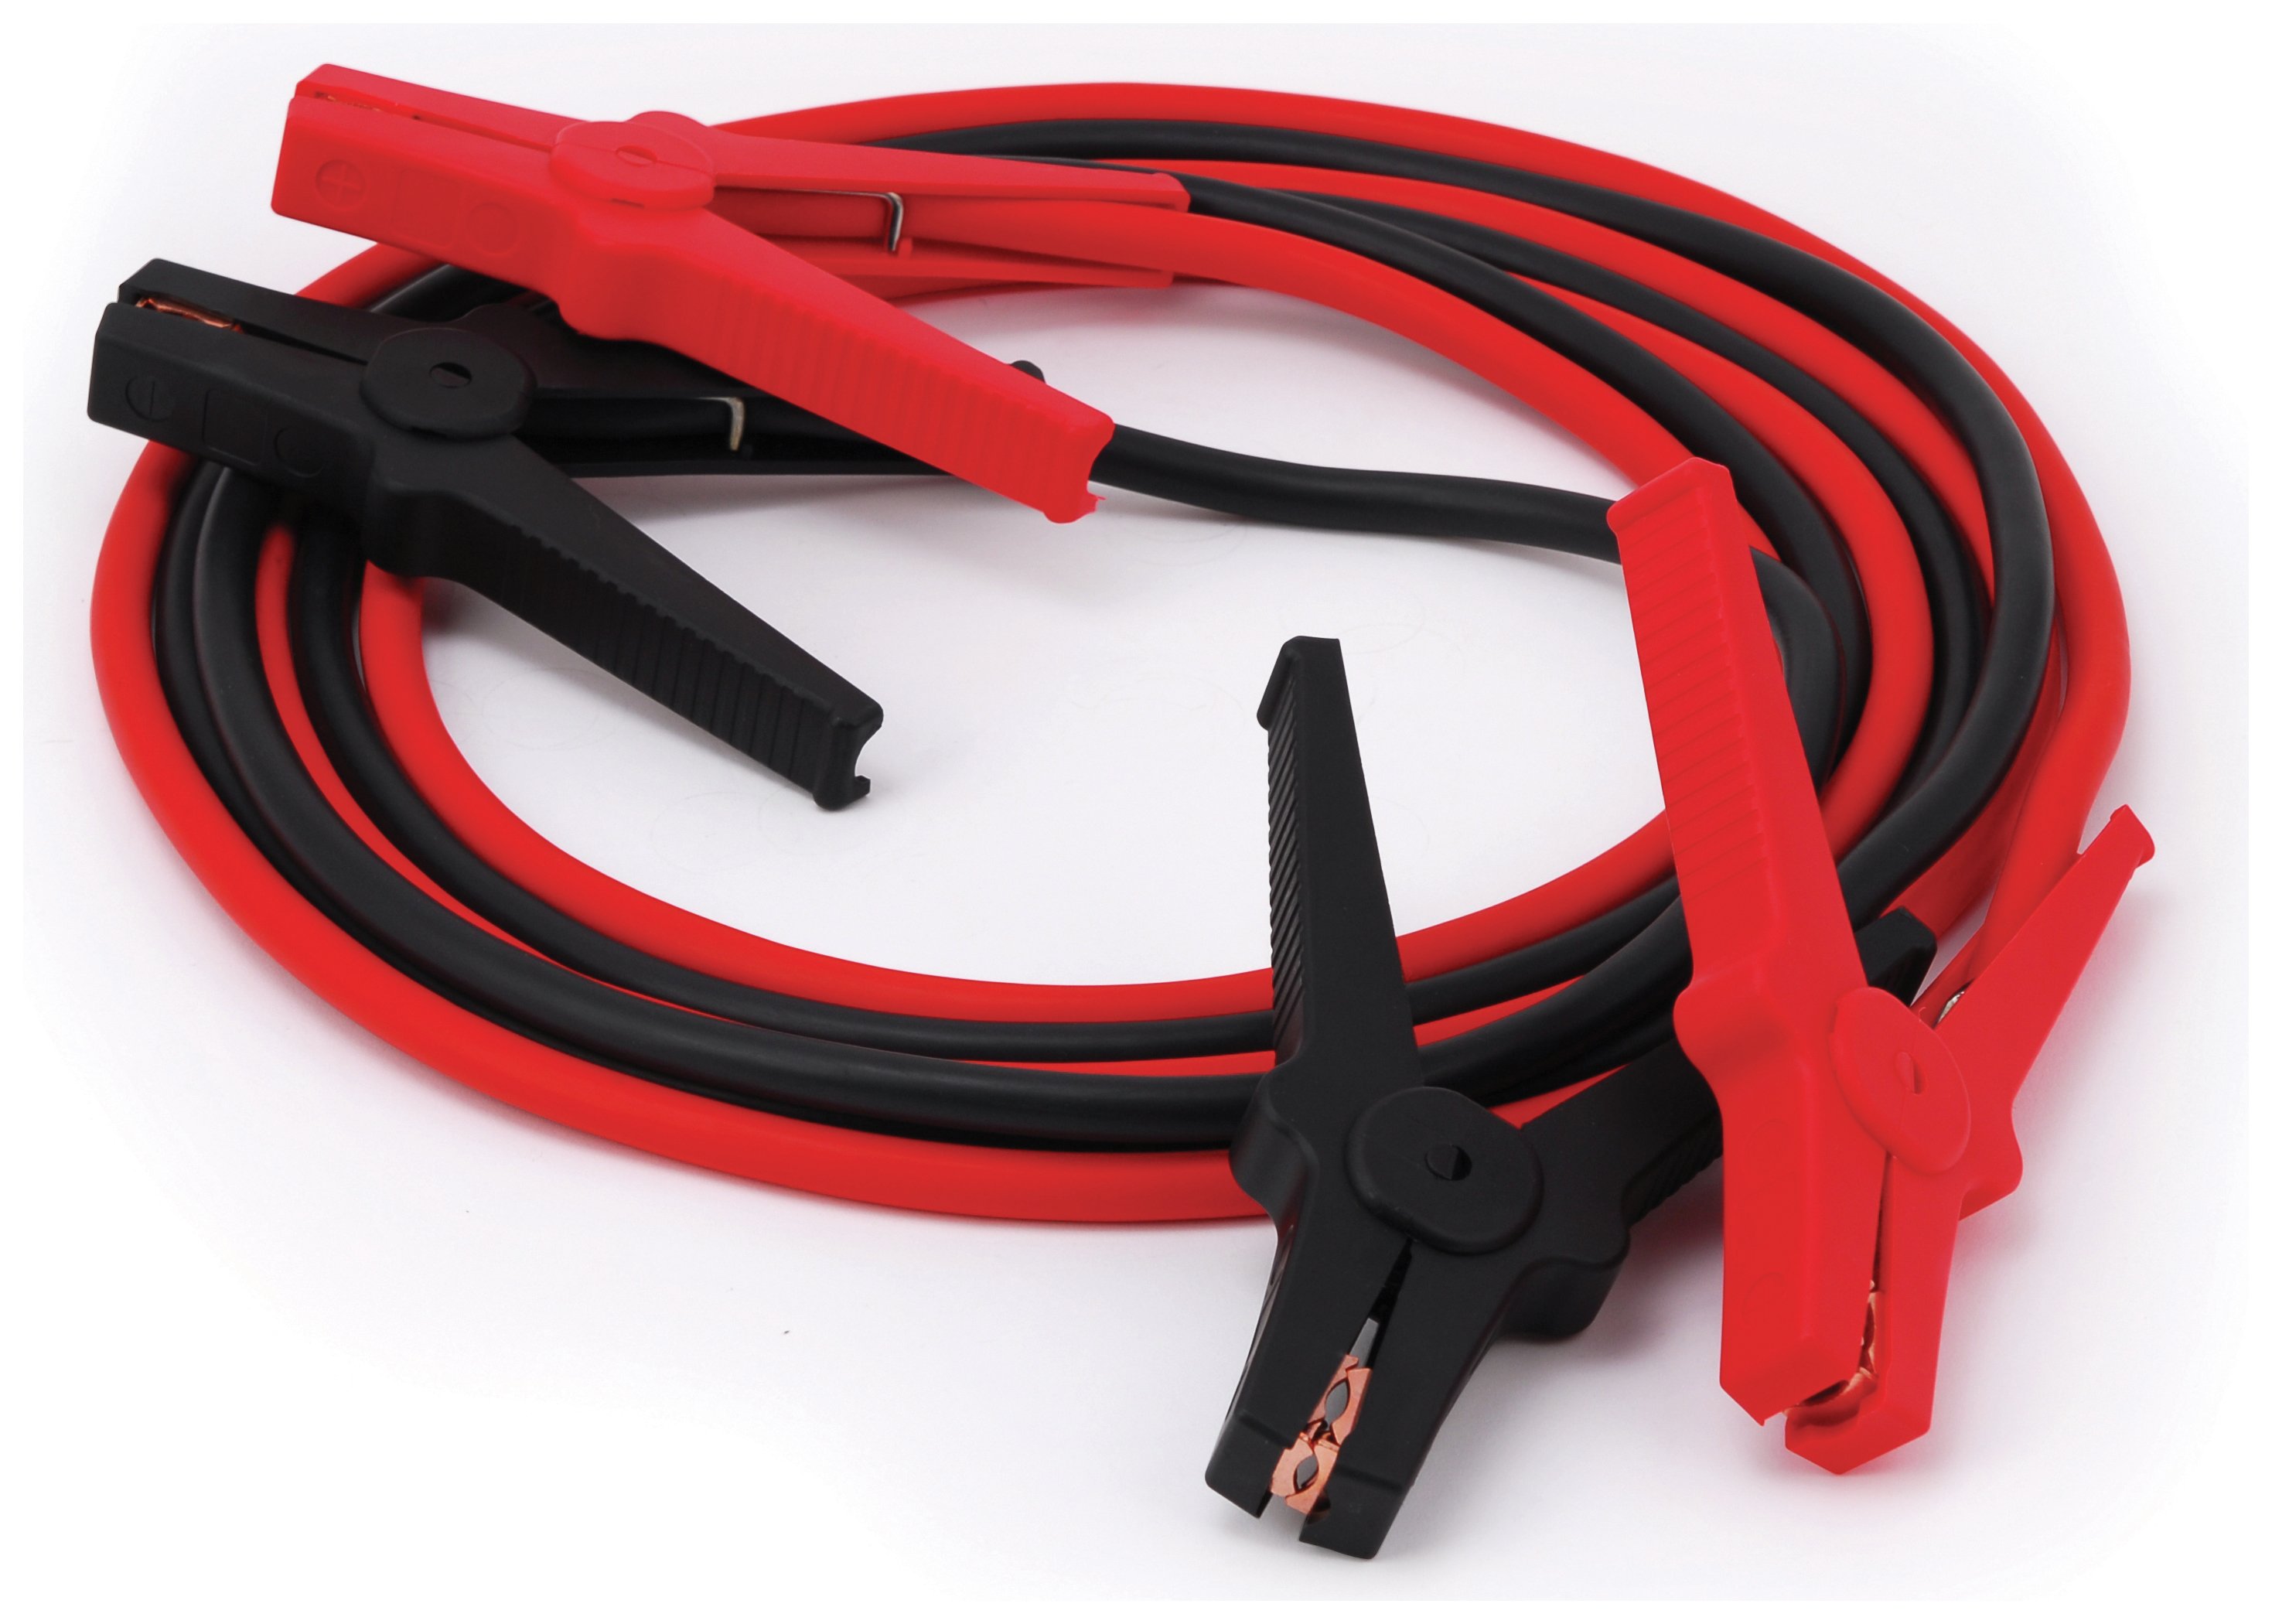 RAC Heavy Duty Booster Cables